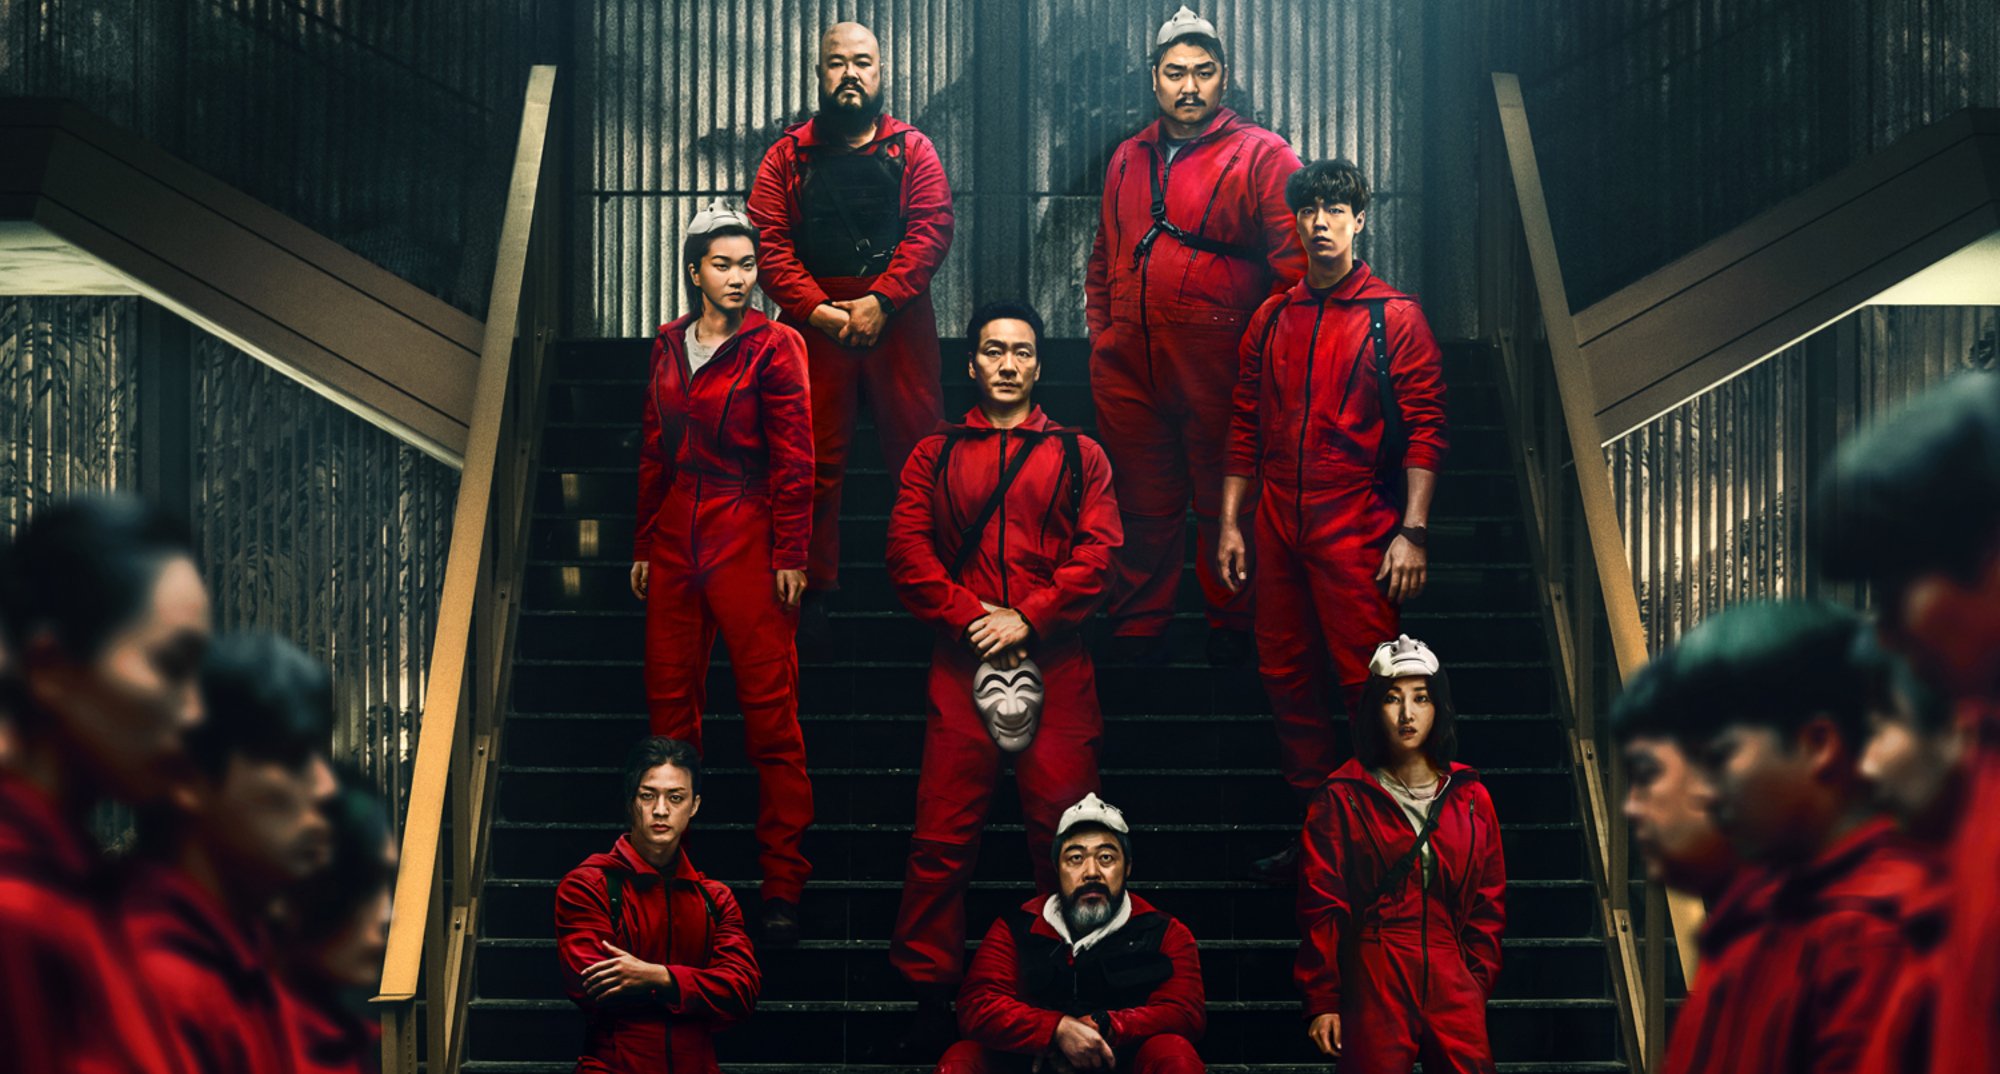 The main cast of 'Money Heist Korea - Joint Economic Area' K-drama wearing red jumpsuits.